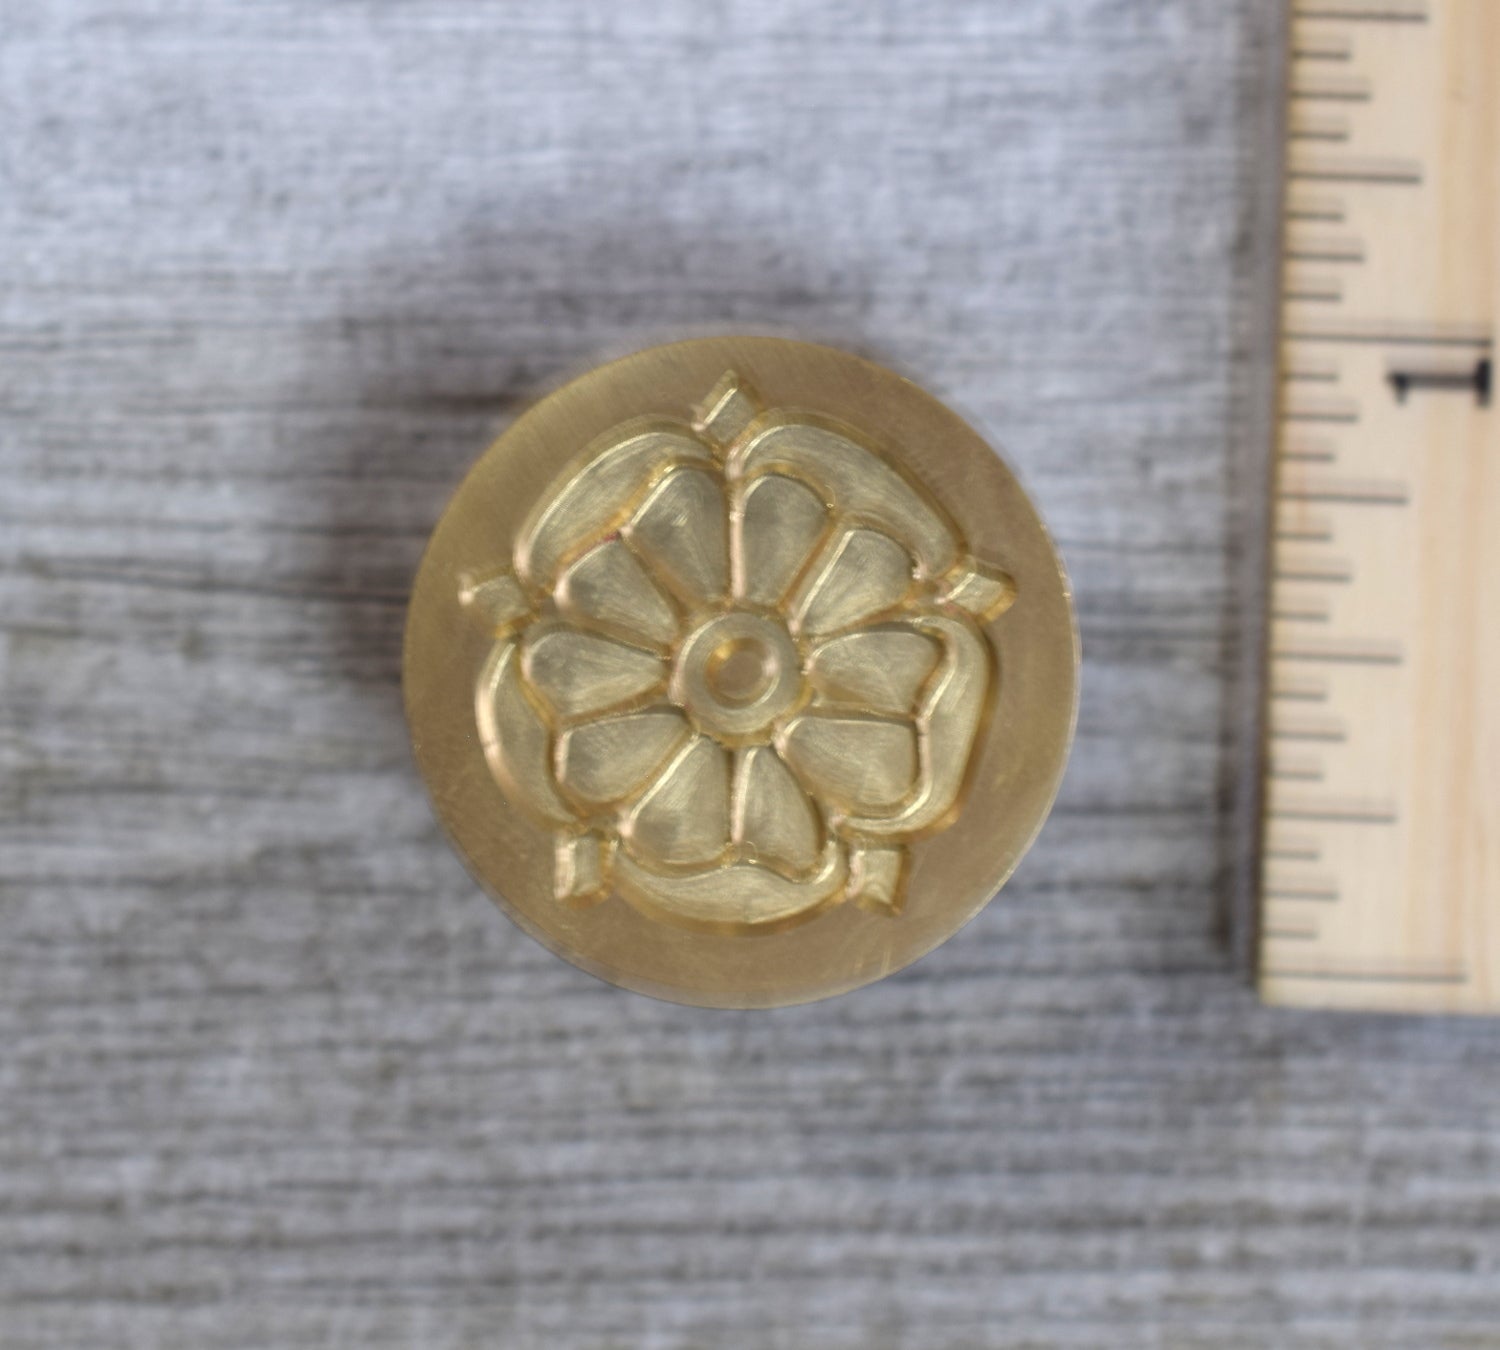 Rose Wax Seal Stamp Head, Flower Metal Sealing Stamps, Craft Supplies,  Stationery, Envelopes, Wedding Invitations Seals 